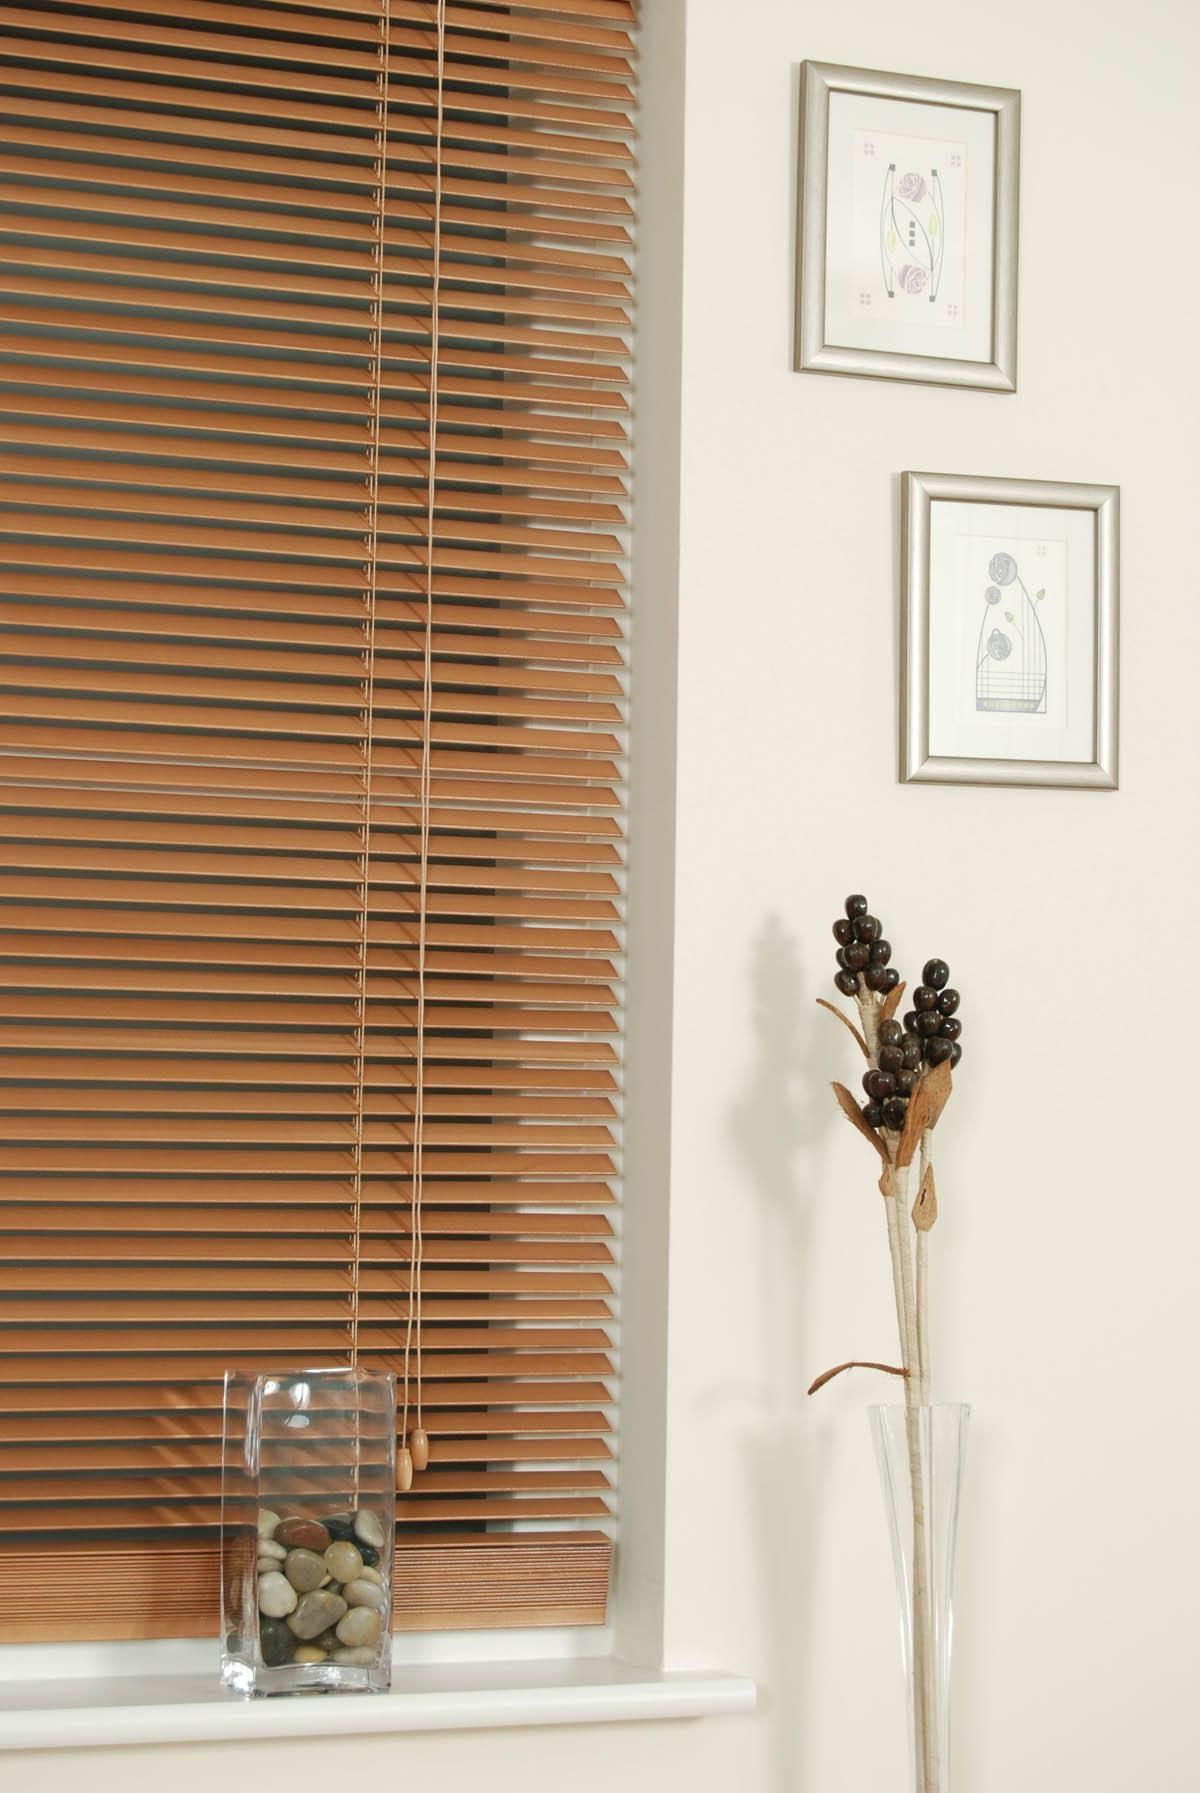 24inch60cm Venetian Blinds View Window Blinds Terrys Fabrics Within Pre Made Roller Blinds (View 12 of 15)